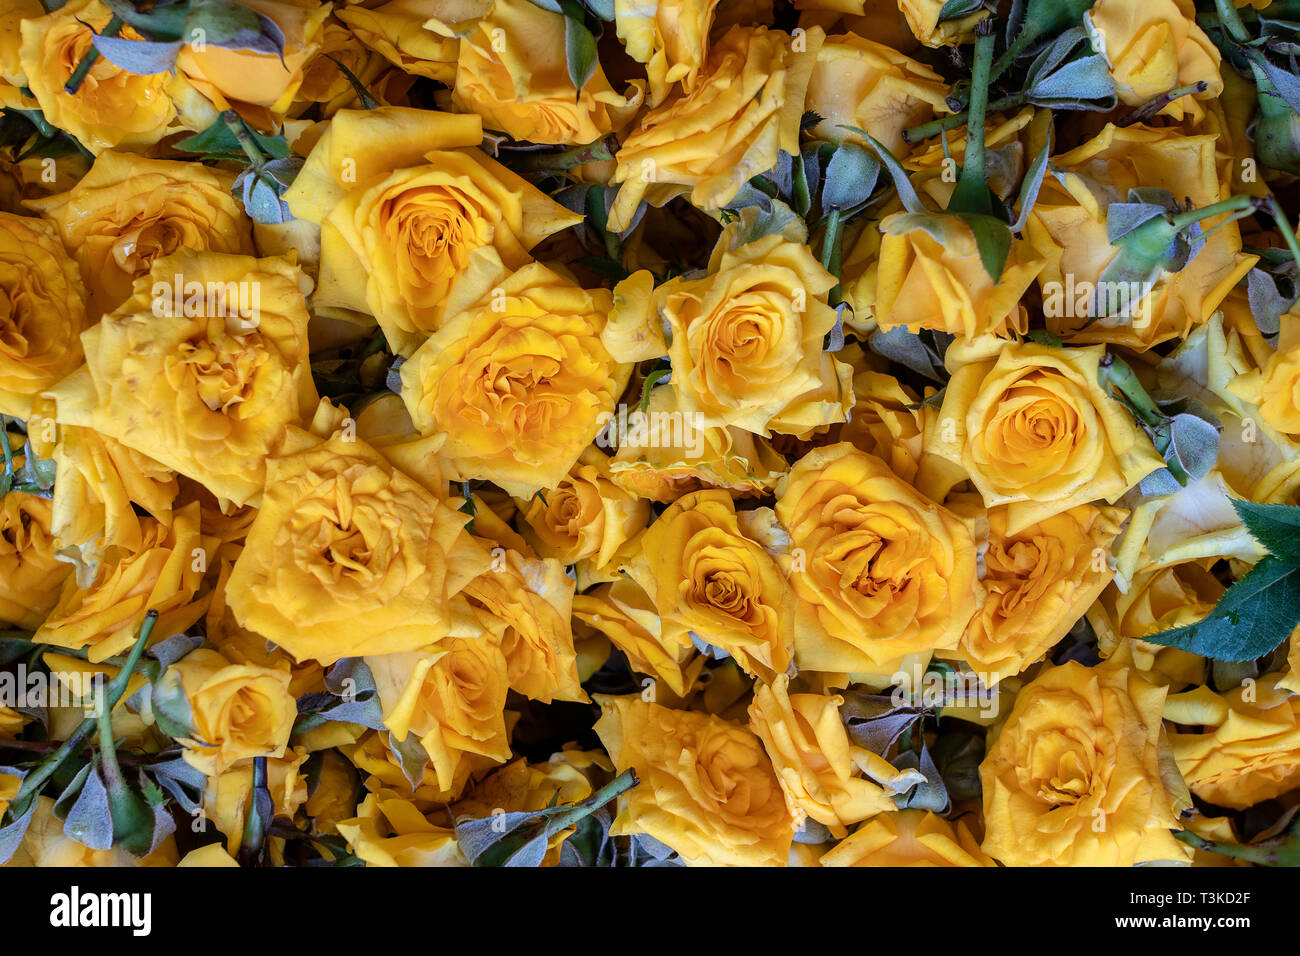 Yellow Roses For Sale High Resolution Stock Photography And Images Alamy